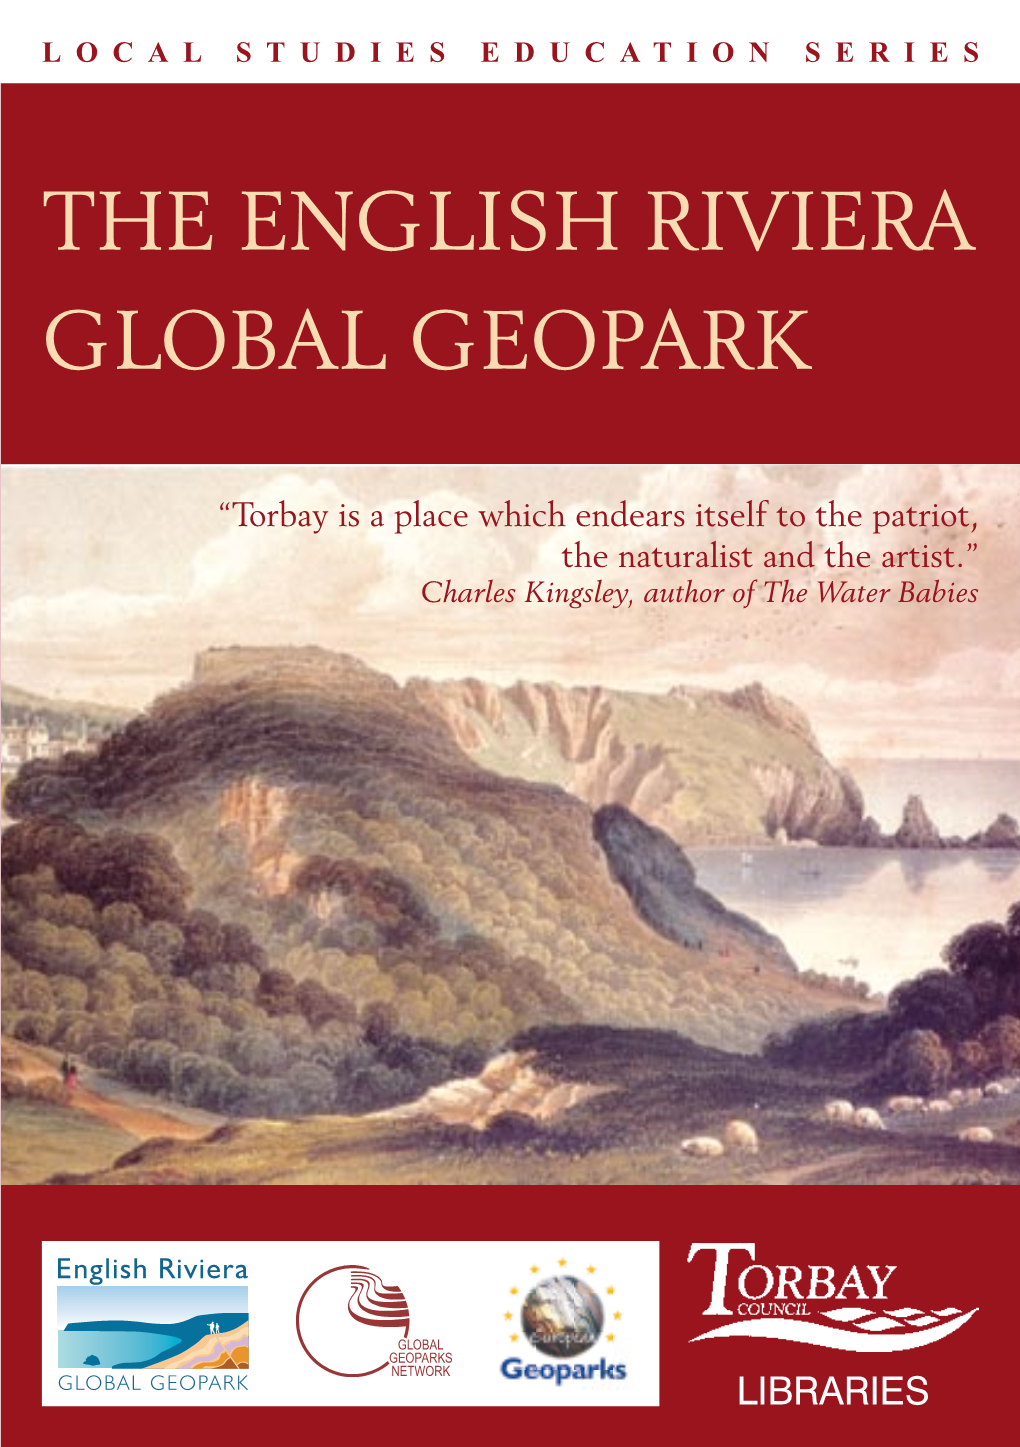 The English Riviera Global Geopark